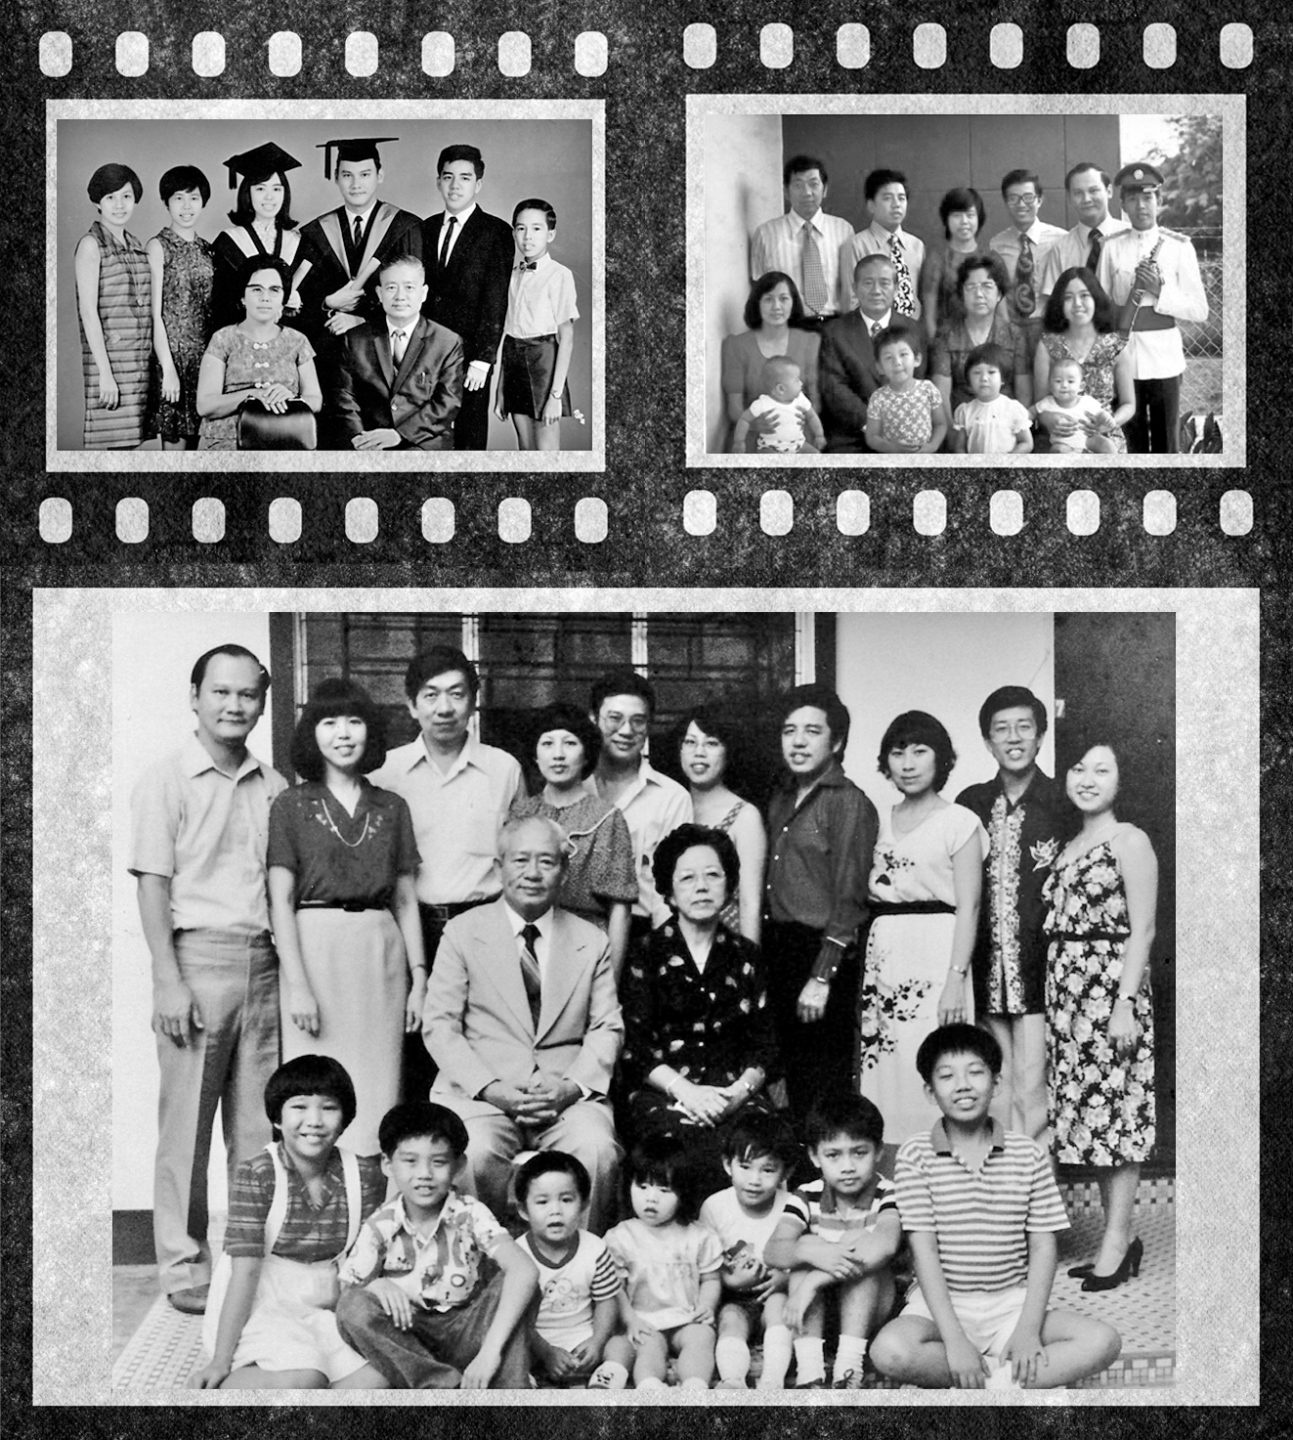 Portraits of the Yap family over the years as they grew. Peter Yap Huat Tuan (seated) called home to be with the Lord on 2 June 1985 at the age of 64.